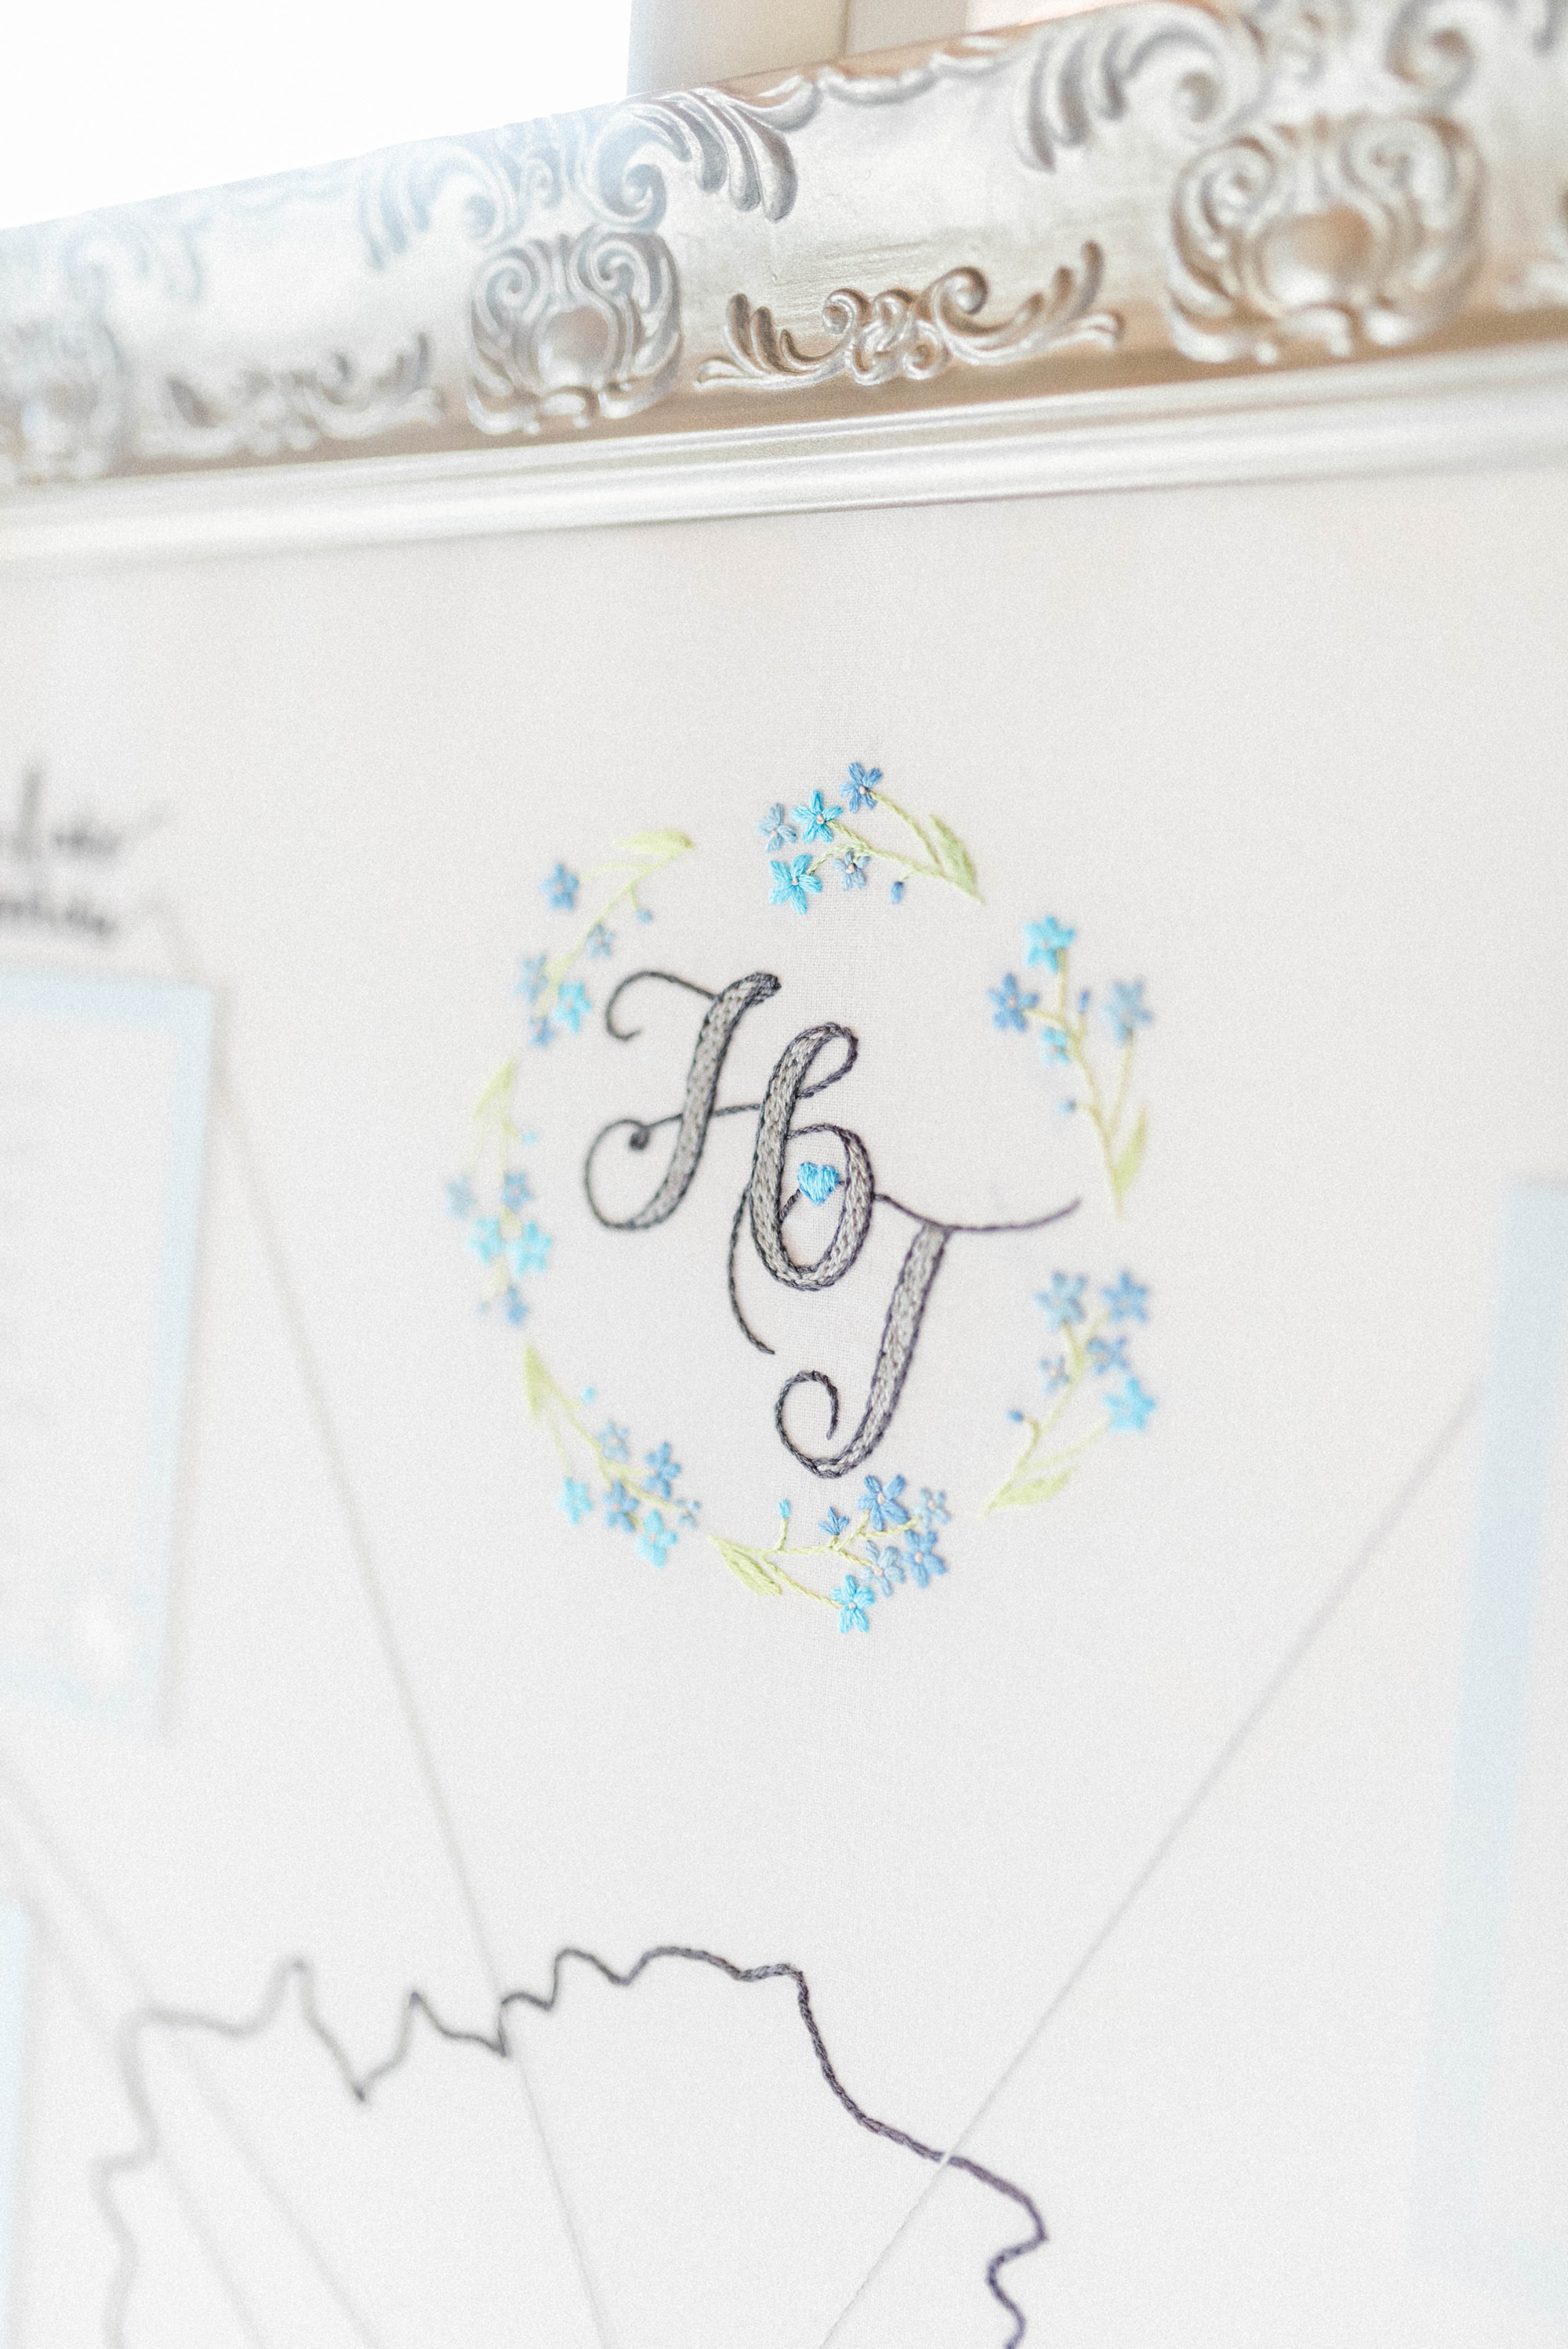 Embroidered table plan